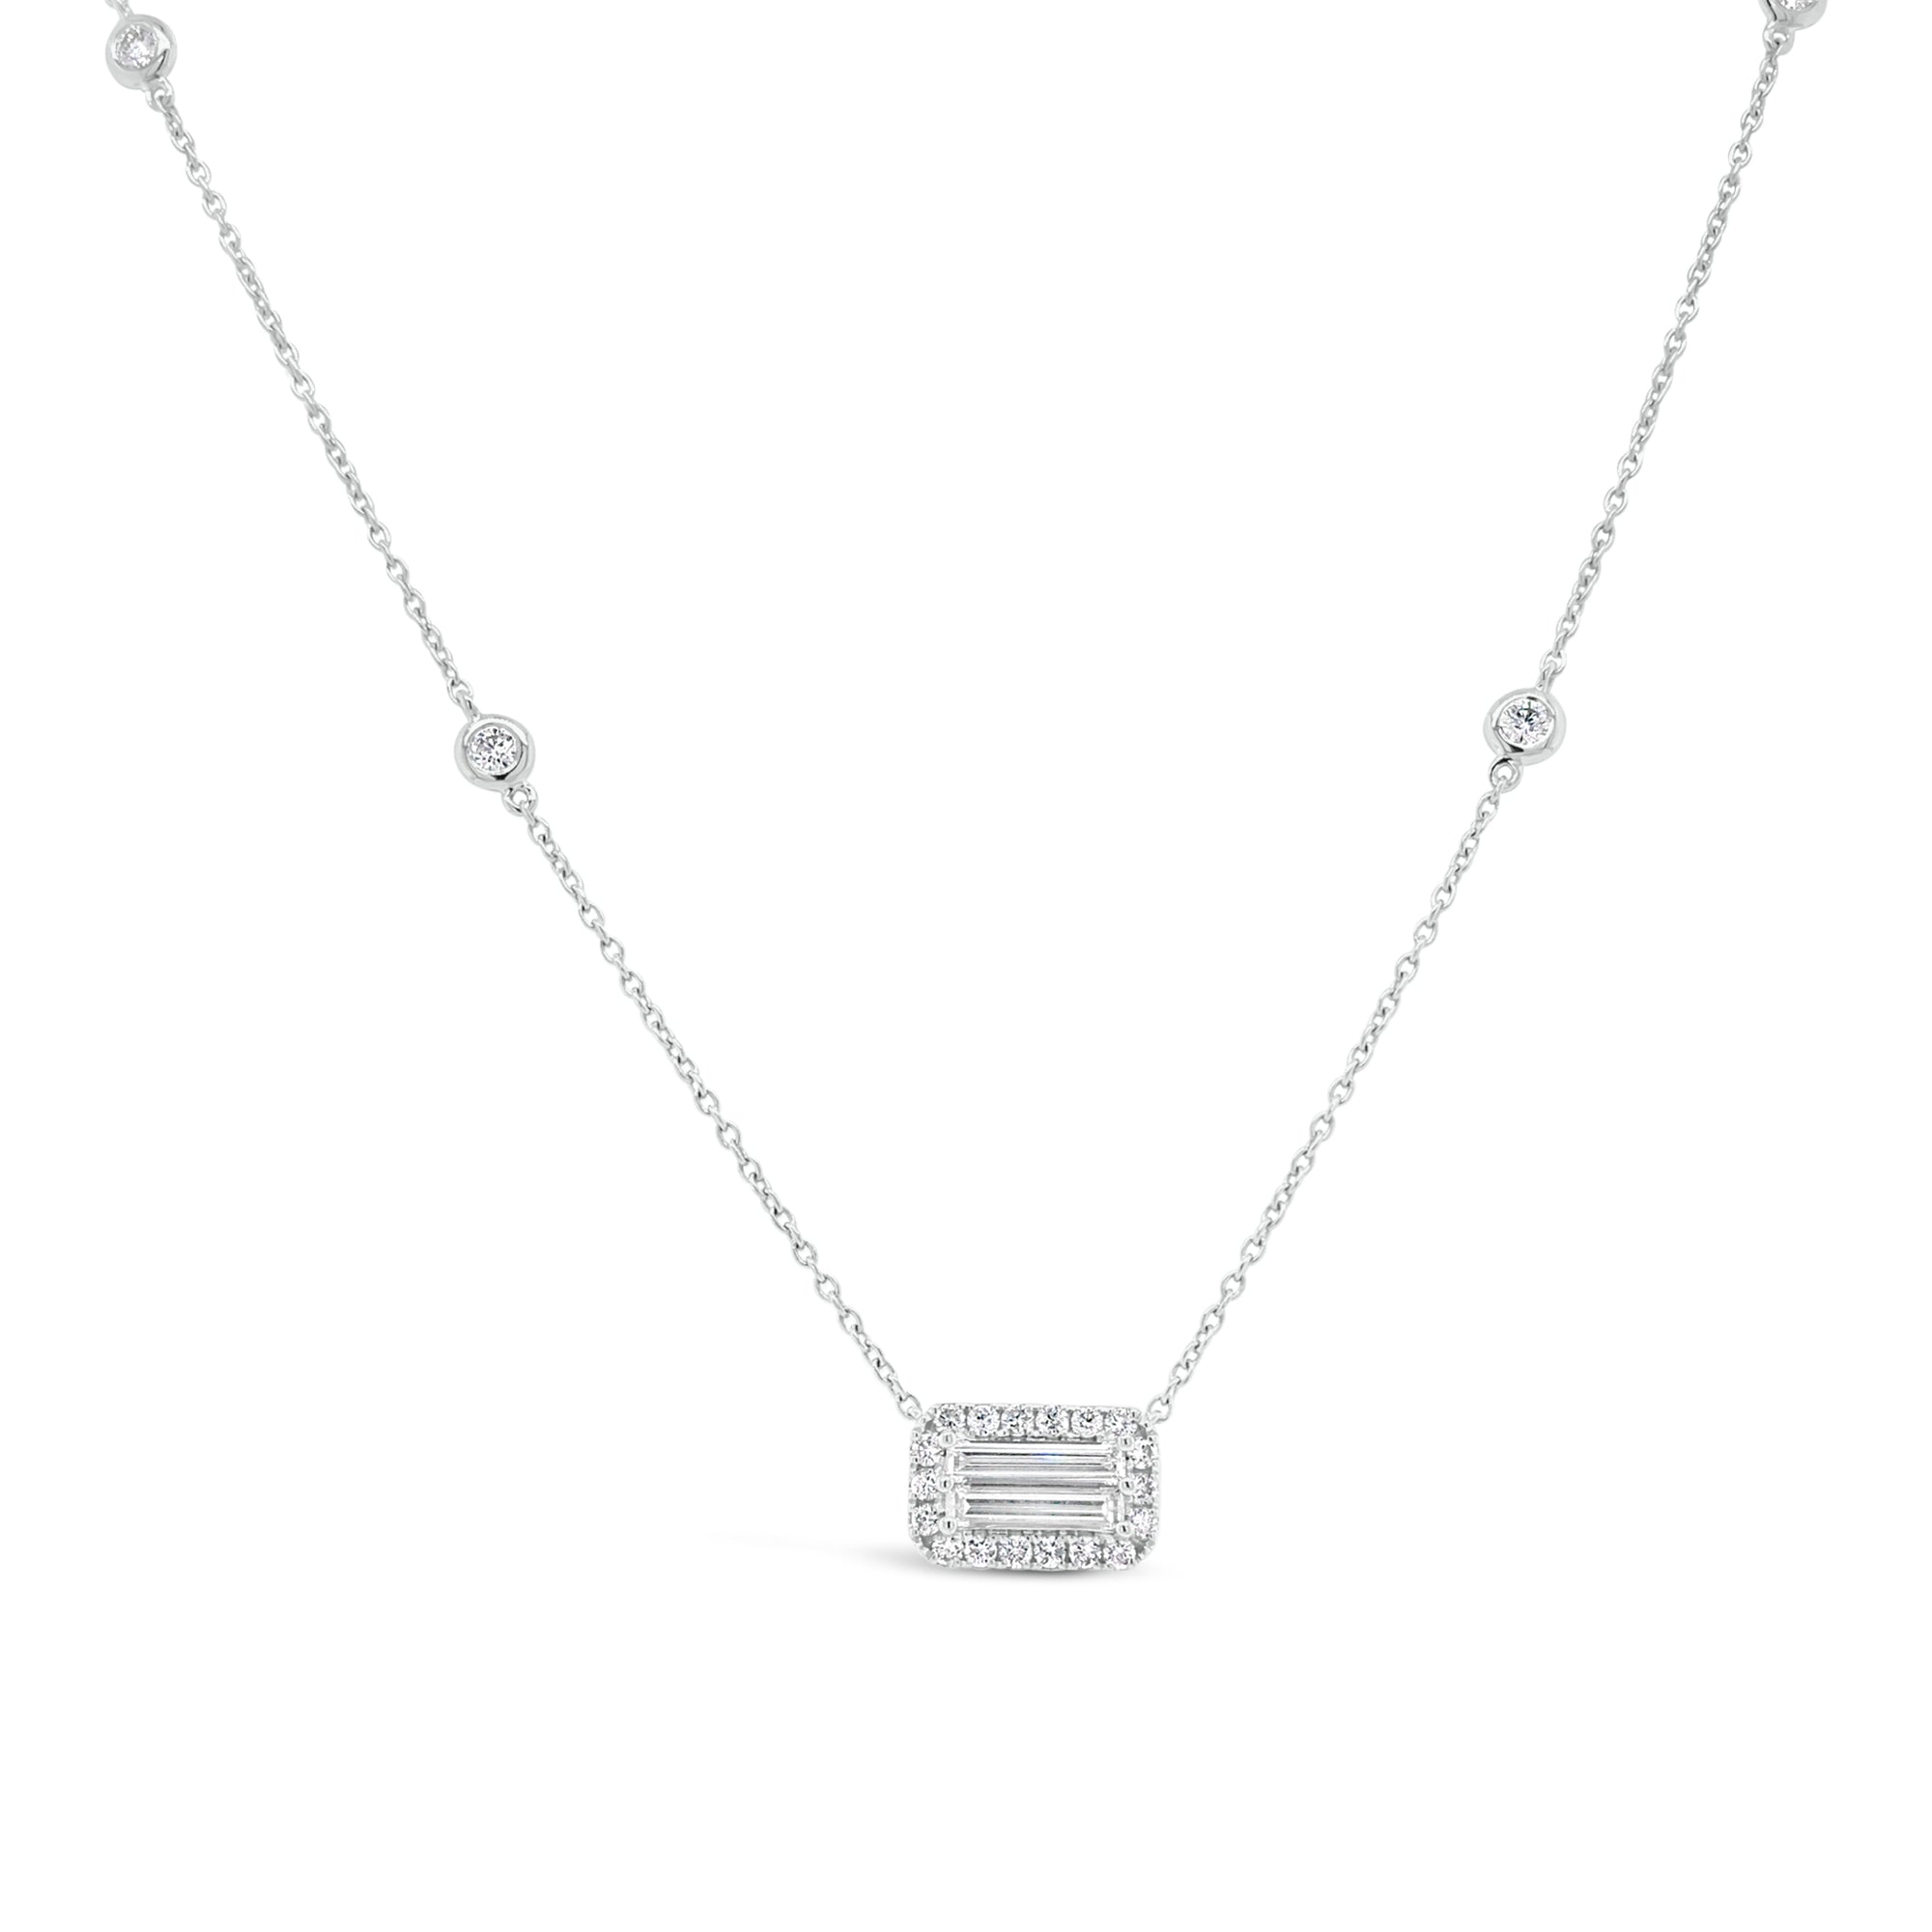 Diamond Baguette Pendant Necklace with Halo  -18K gold weighing 3.37 grams  -2 slim baguettes totaling 0.40 carats  -22 round diamonds totaling 0.33 carats